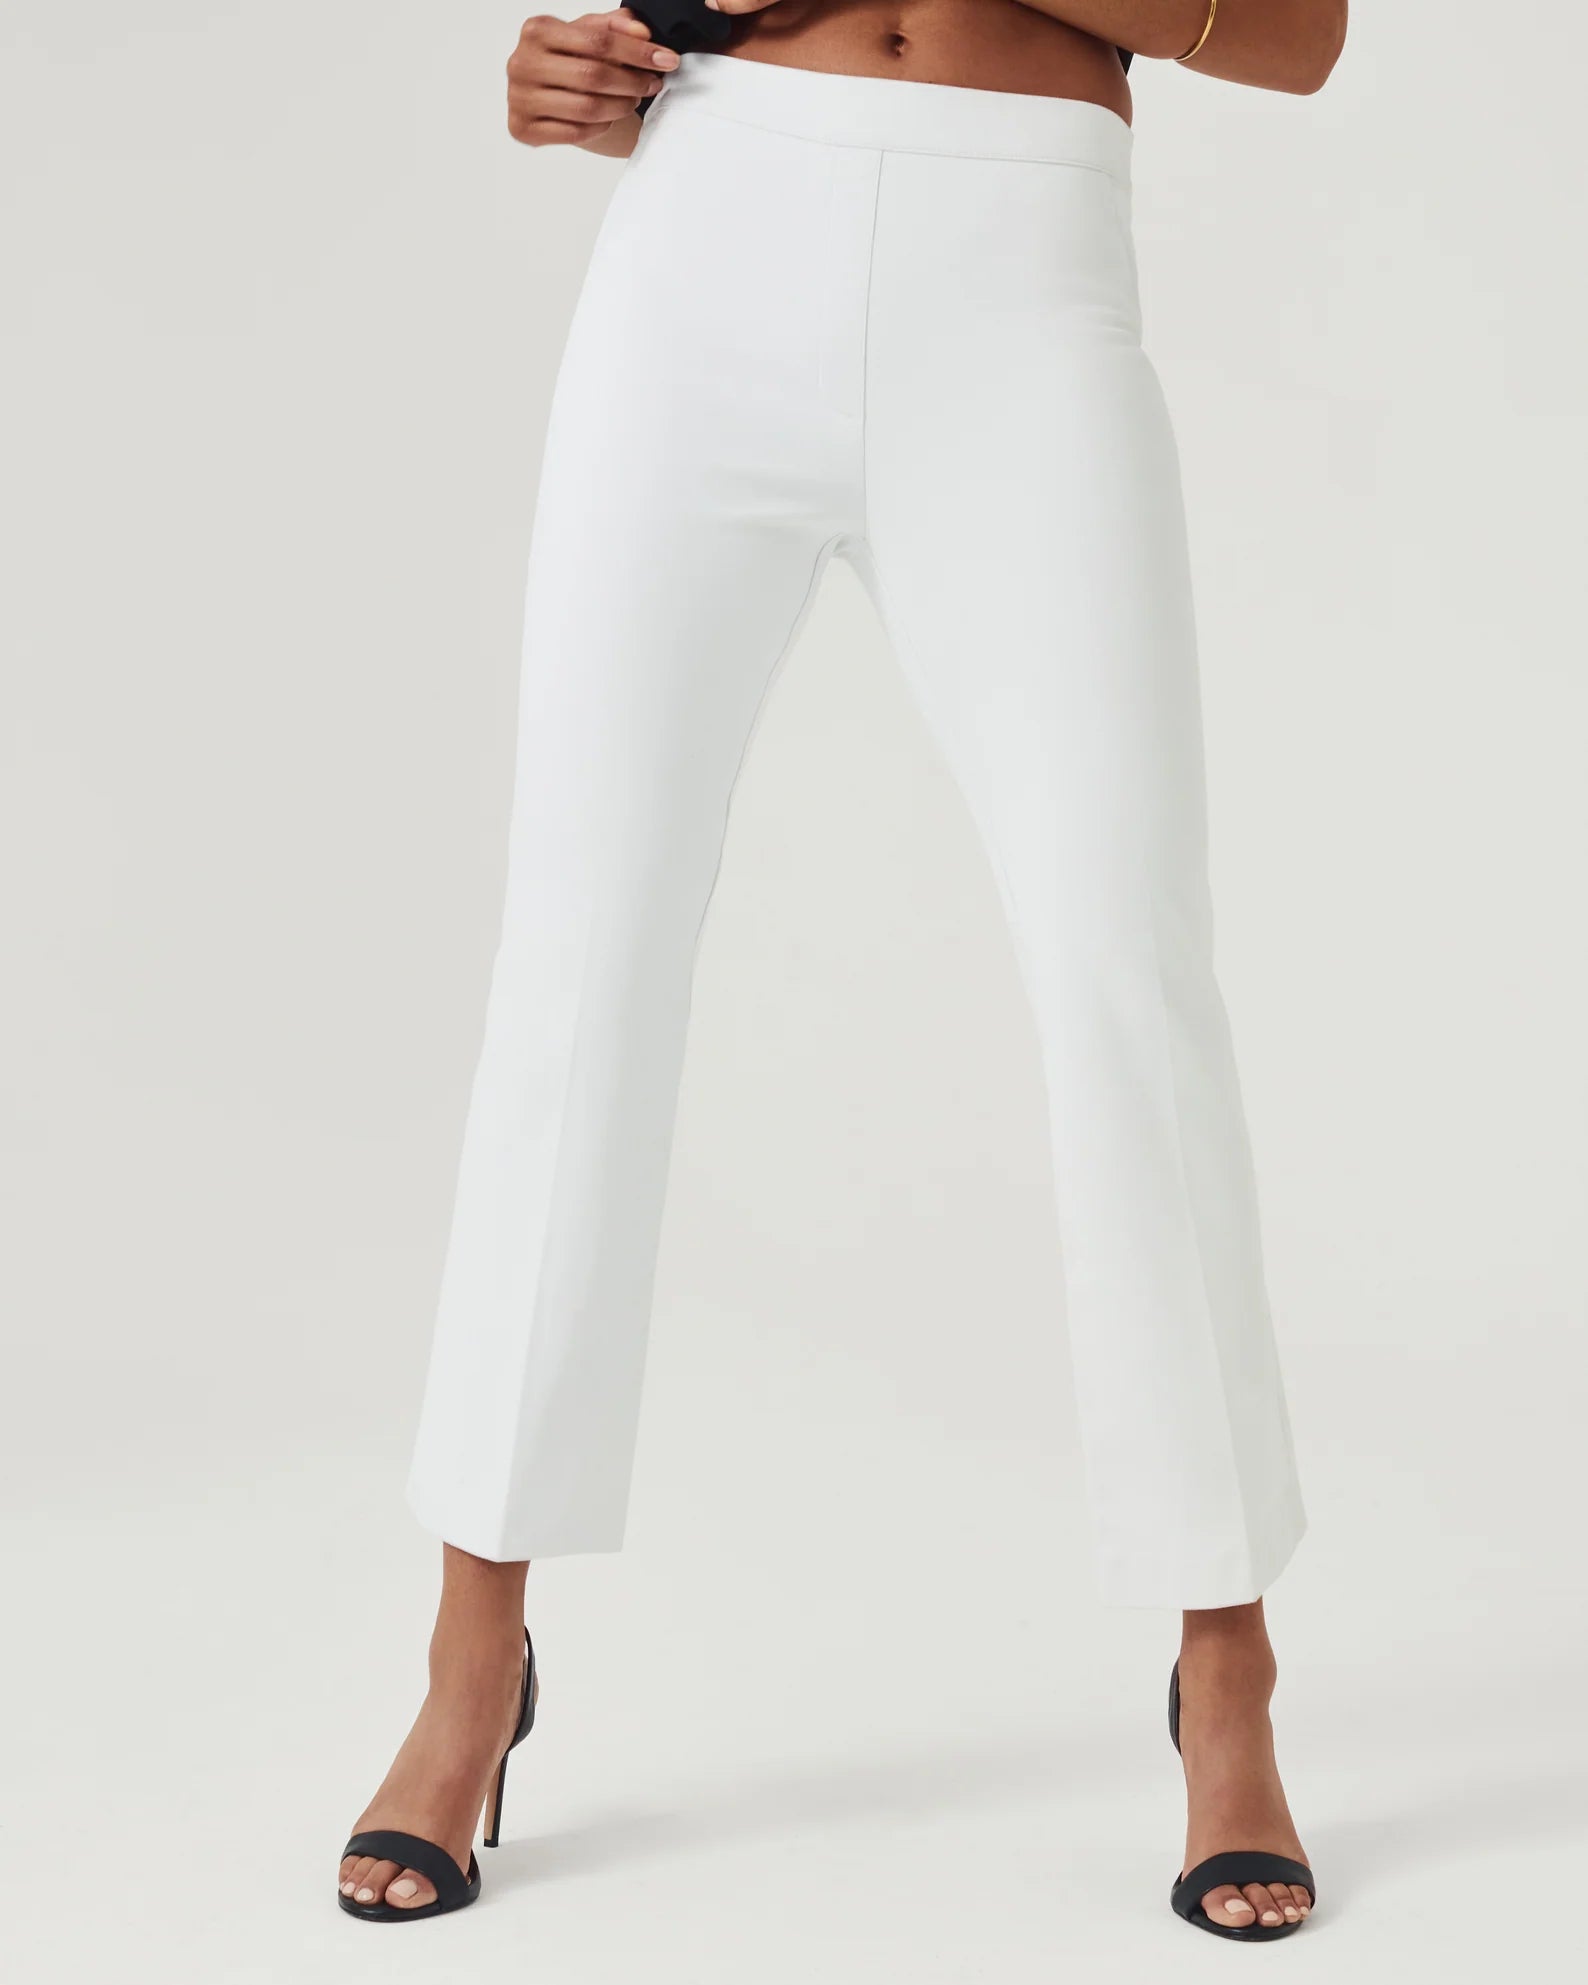 SPANX, Pants & Jumpsuits, Spanx The Perfect Fit Hirise Flare Pant